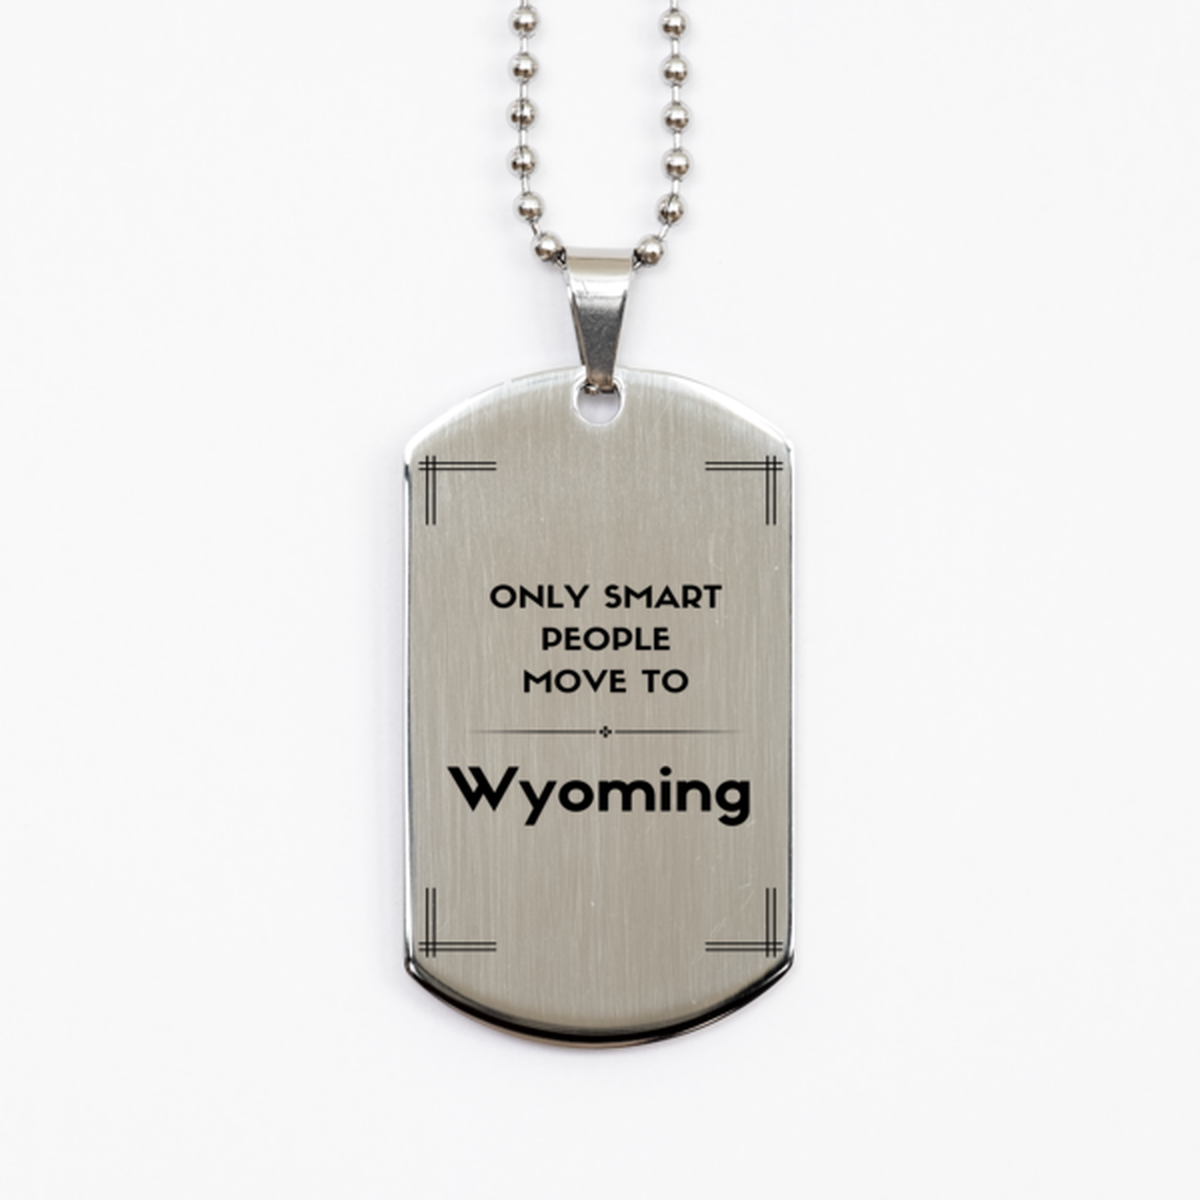 Only smart people move to Wyoming Silver Dog Tag, Gag Gifts For Wyoming, Move to Wyoming Gifts for Friends Coworker Funny Saying Quote